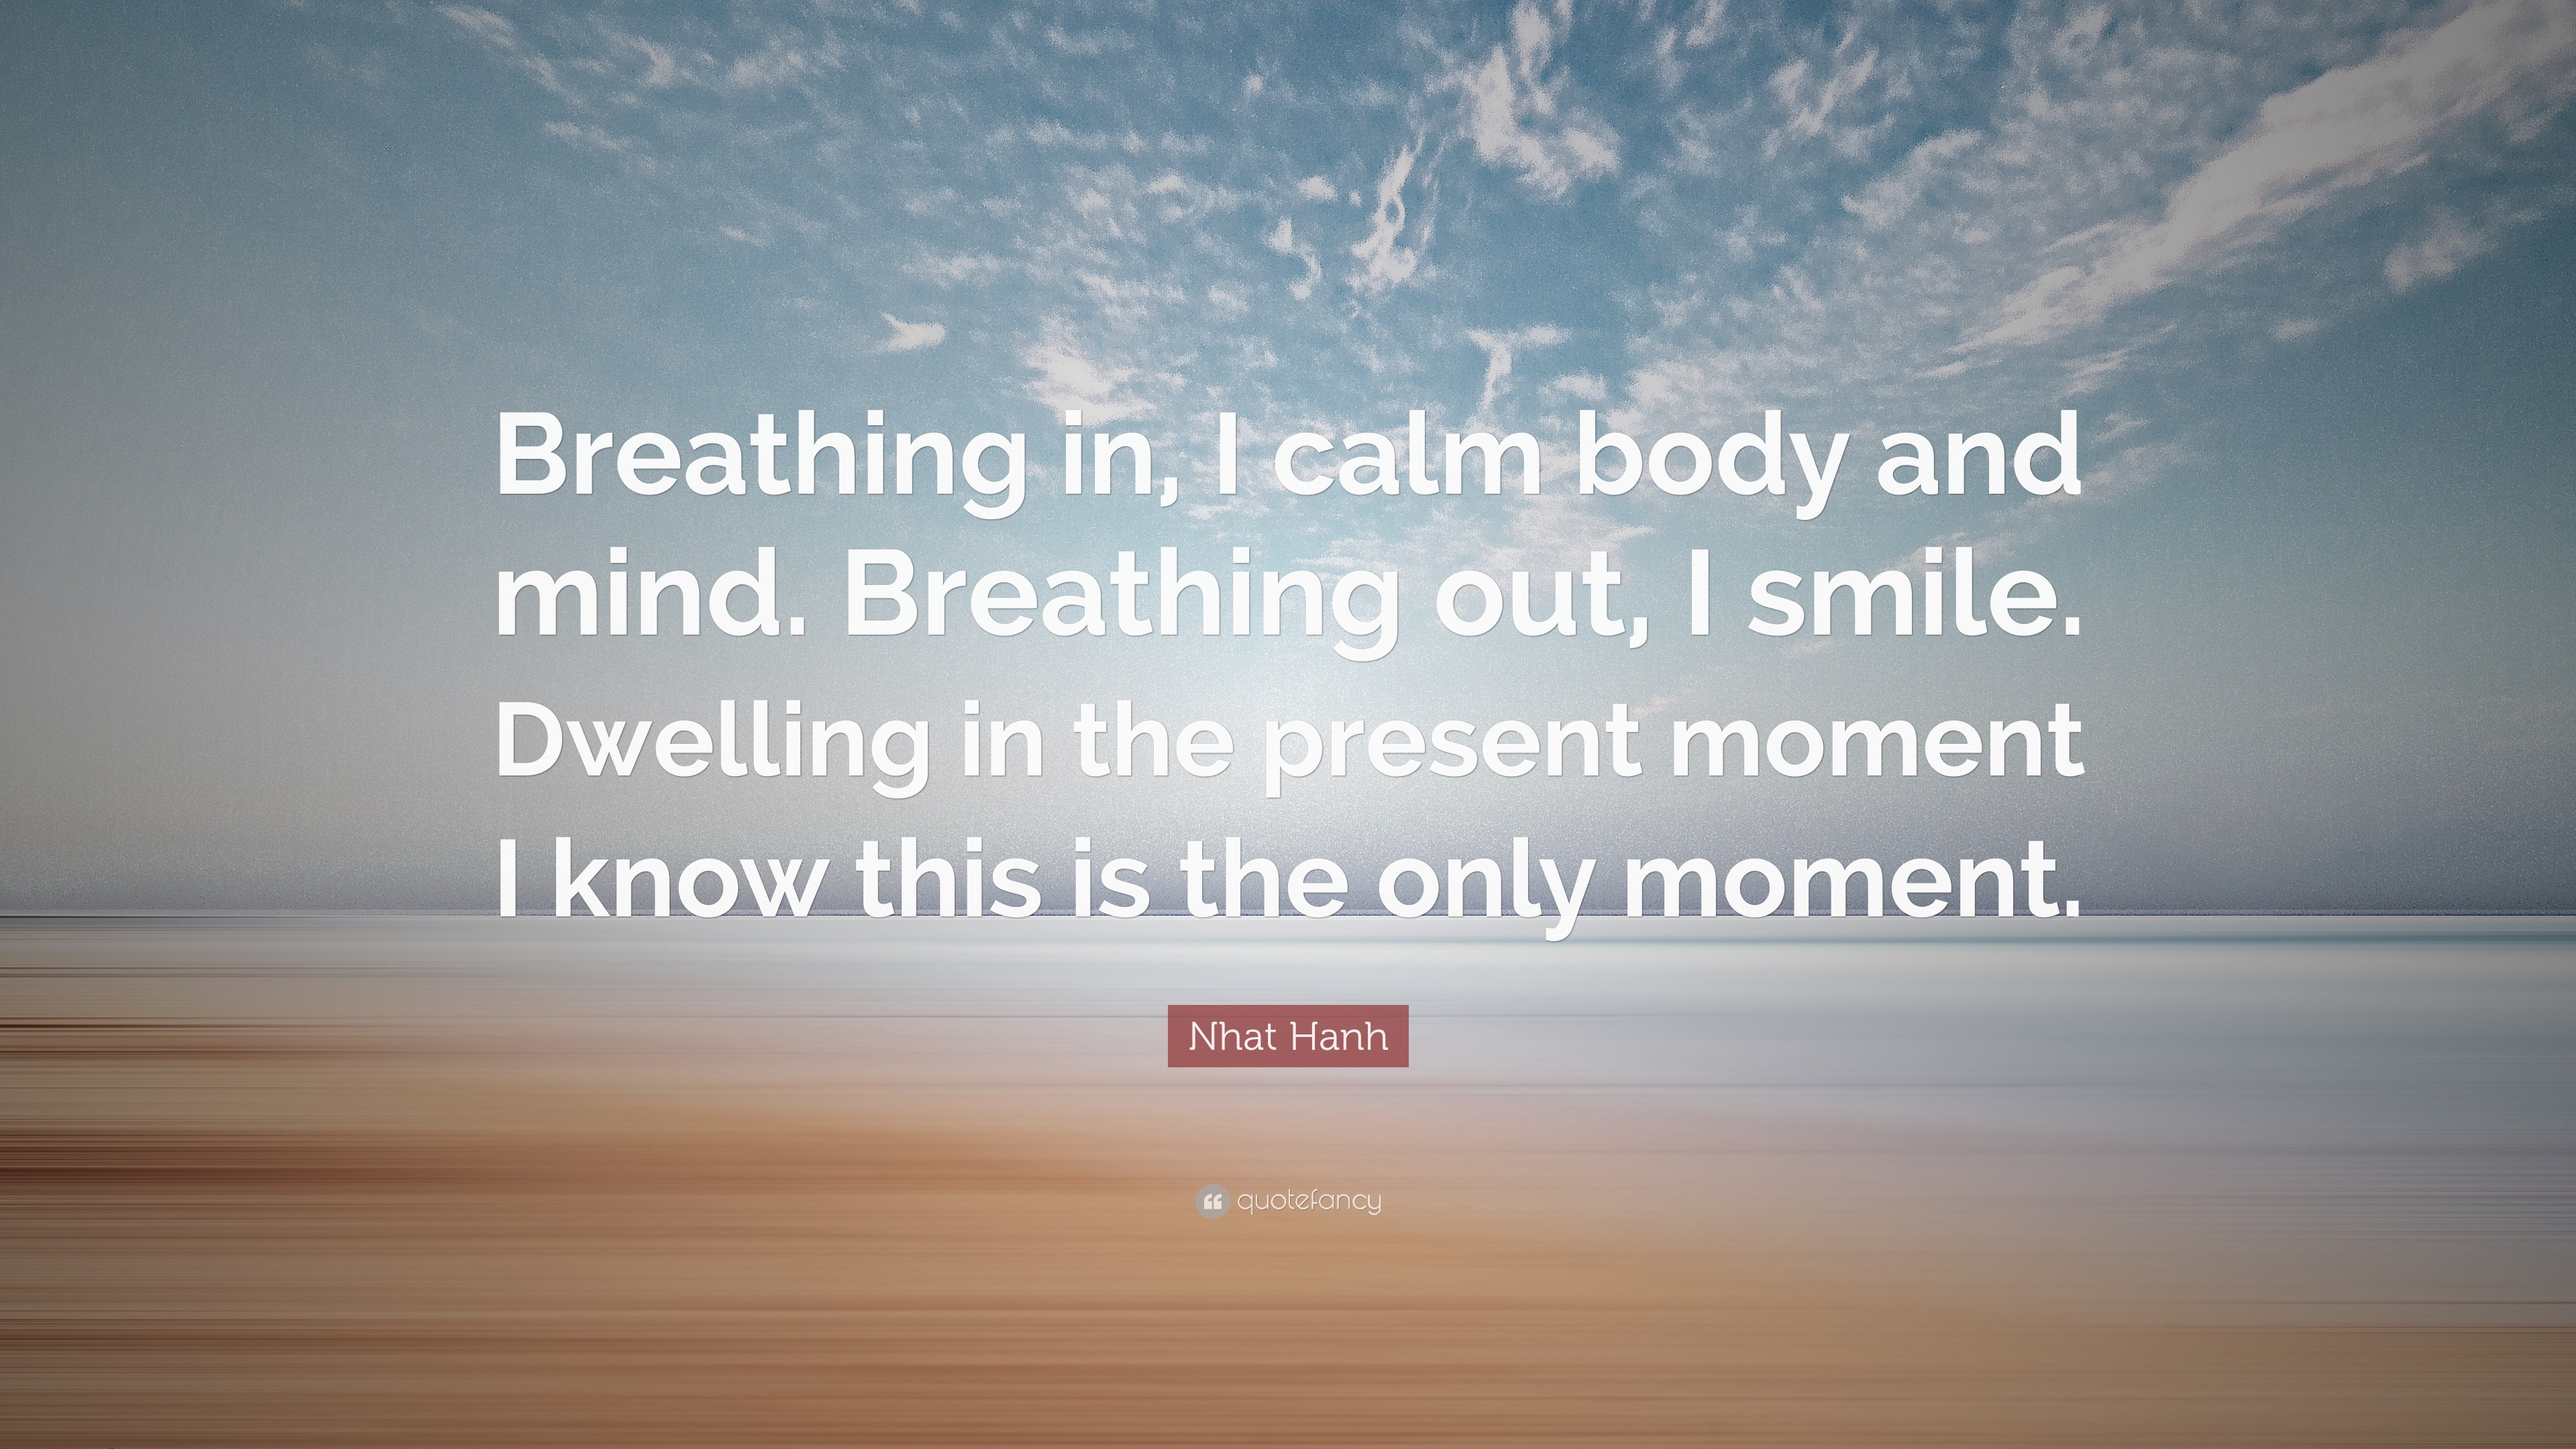 Buddha Power - Breathing in, I calm body and mind.